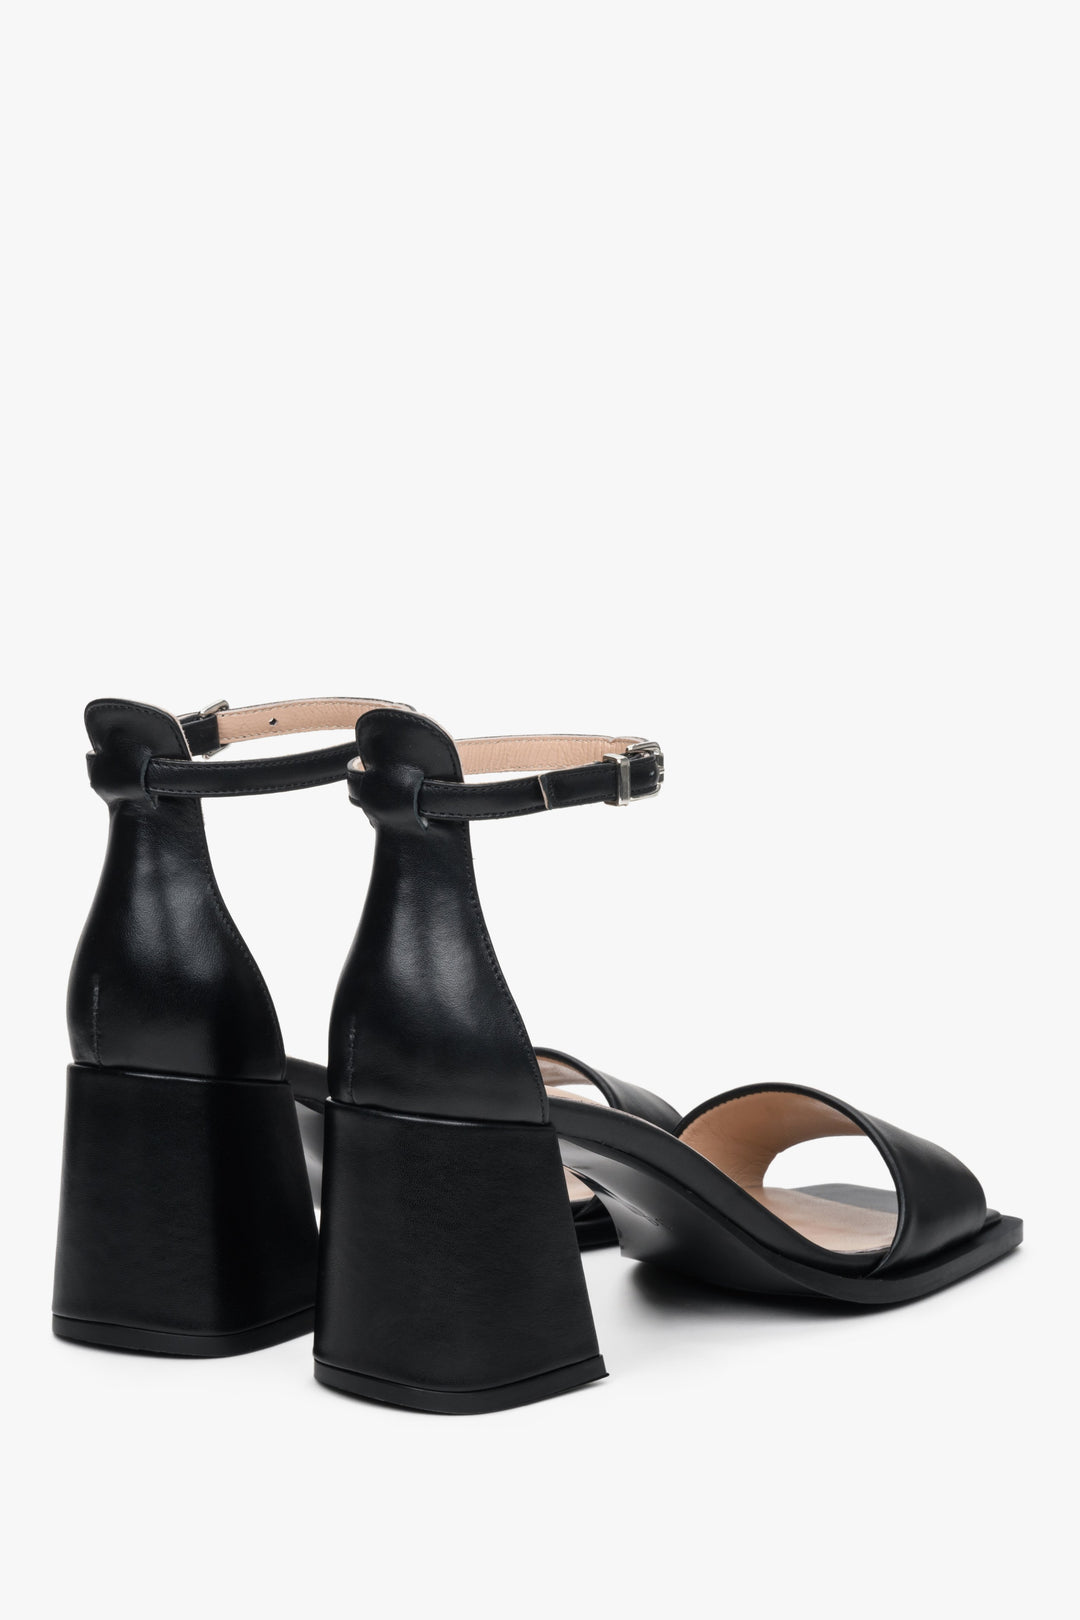 Women's leather Estro sandals with a block heel in black colour - close-up of the heel.